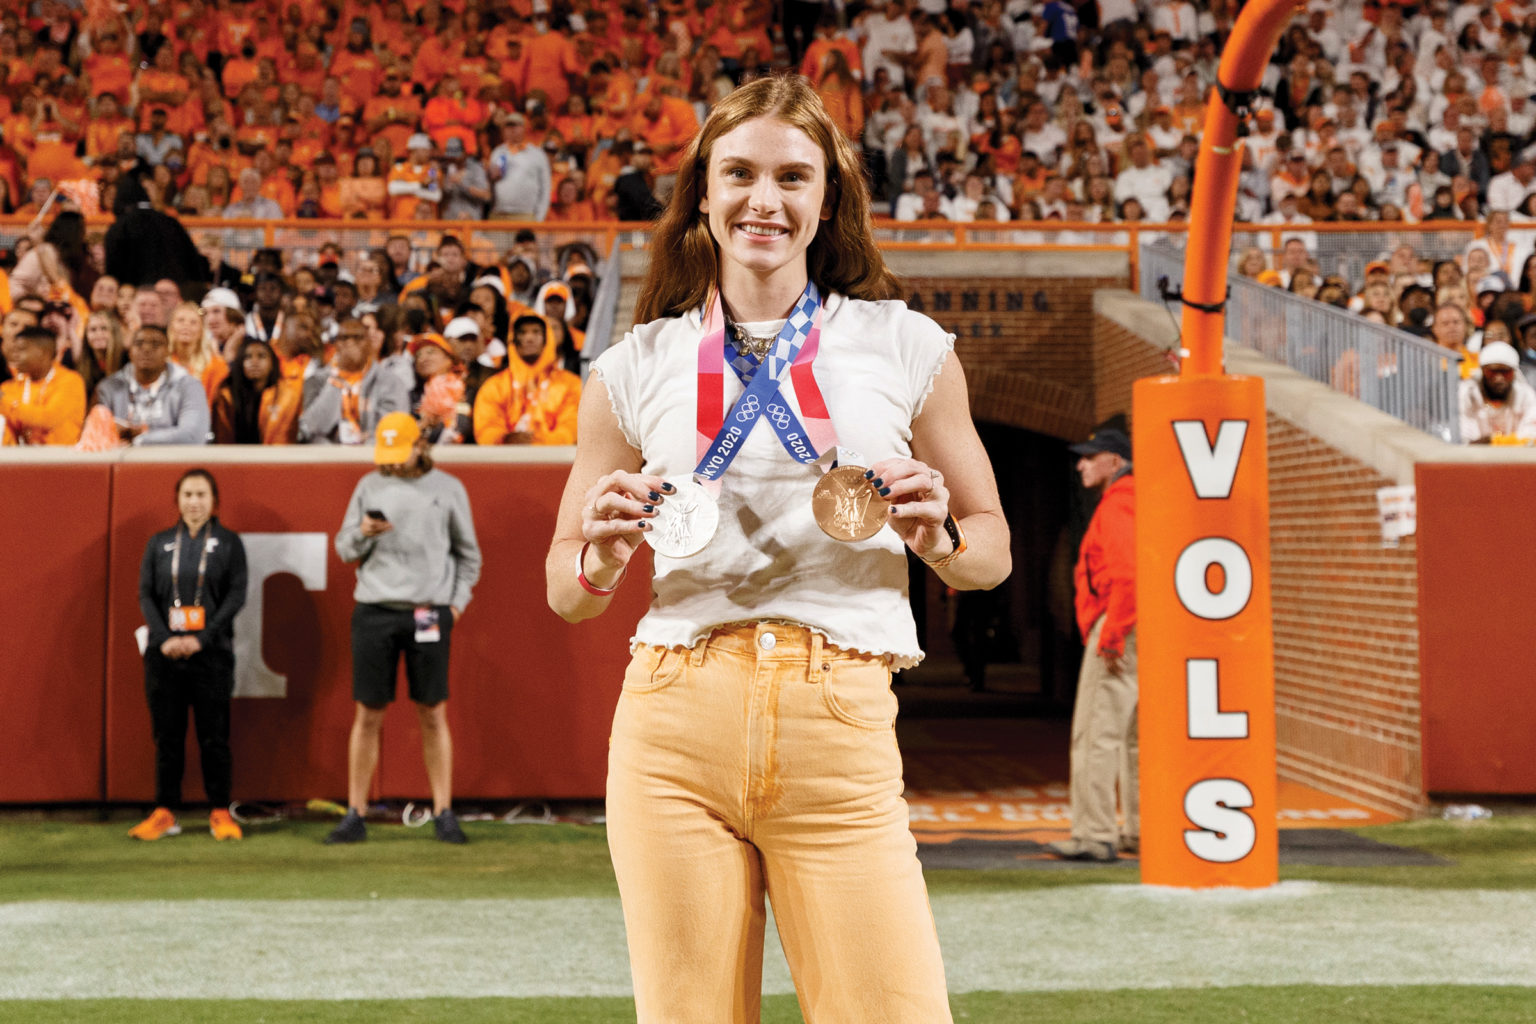 A woman in orange jeans displays her medals worn around her neck on the football field at Neyland Stadium